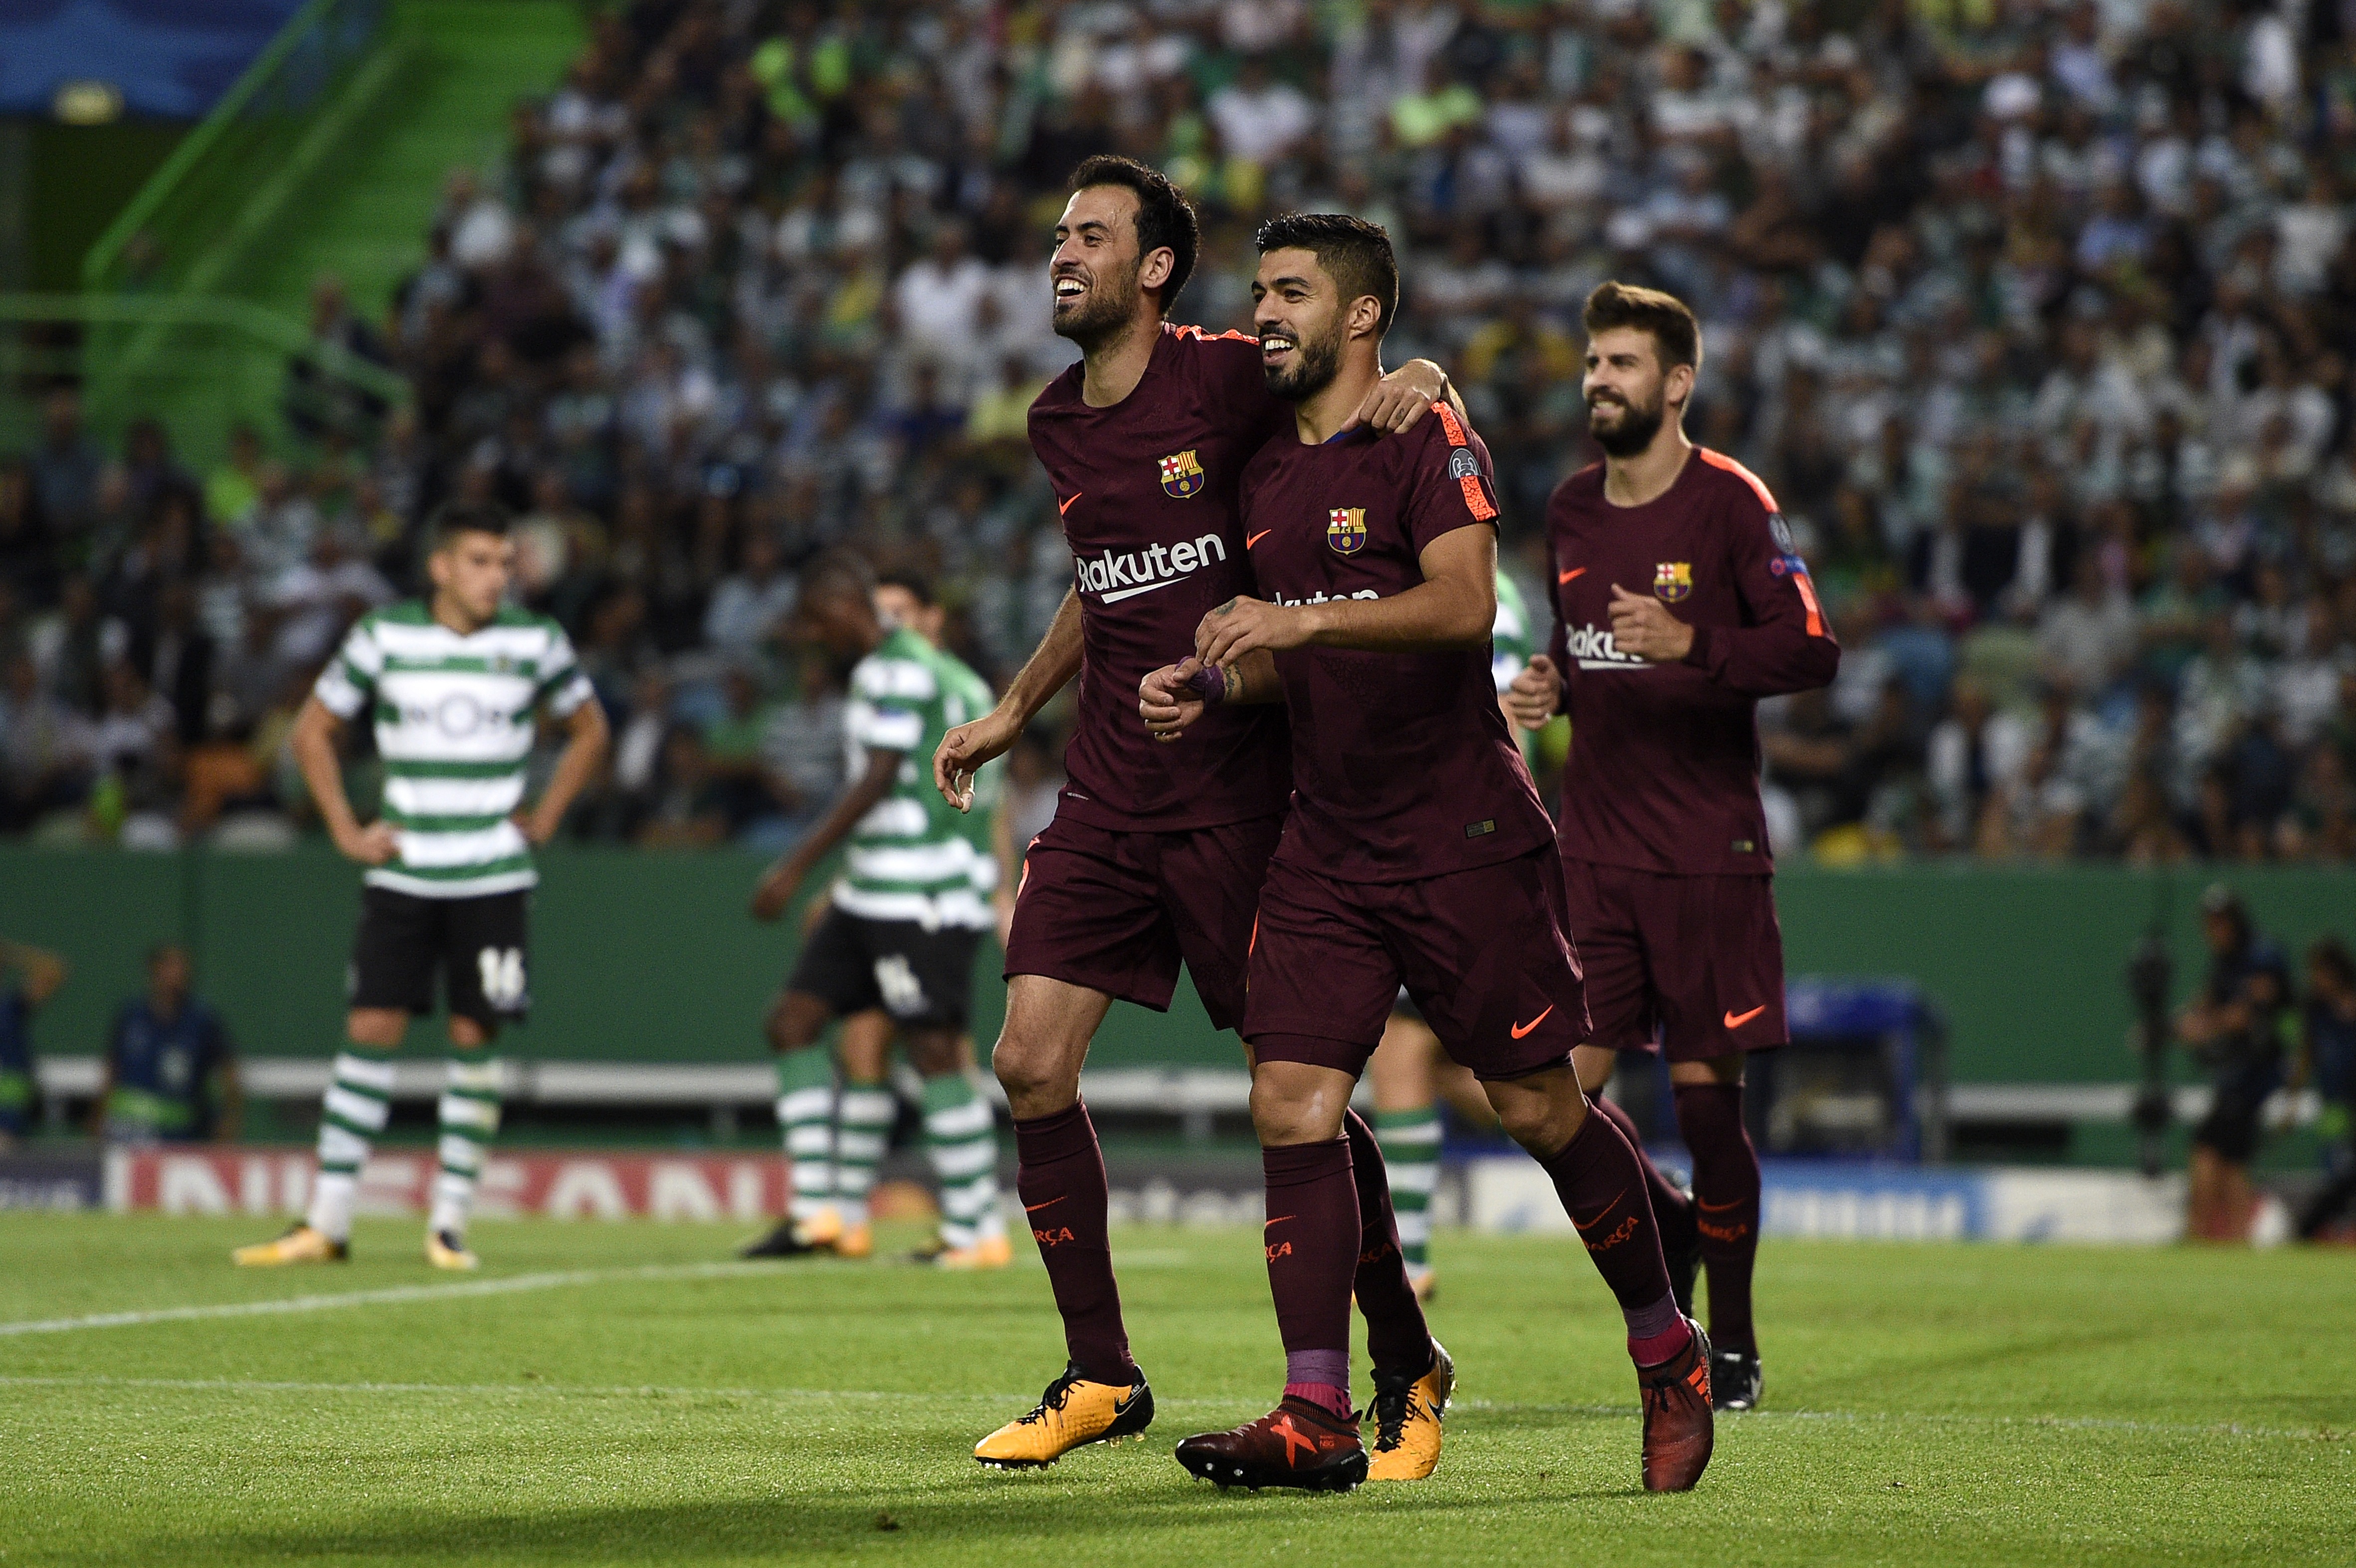 LISBON, PORTUGAL - SEPTEMBER 27: Sergio Busquets and Luis Suarez of FC Barcelona celebrates after scores the first goal during the UEFA Champions League group D match between Sporting CP and FC Barcelona at Estadio Jose Alvalade on September 27, 2017 in Lisbon, Portugal. (Photo by Octavio Passos/Getty Images)